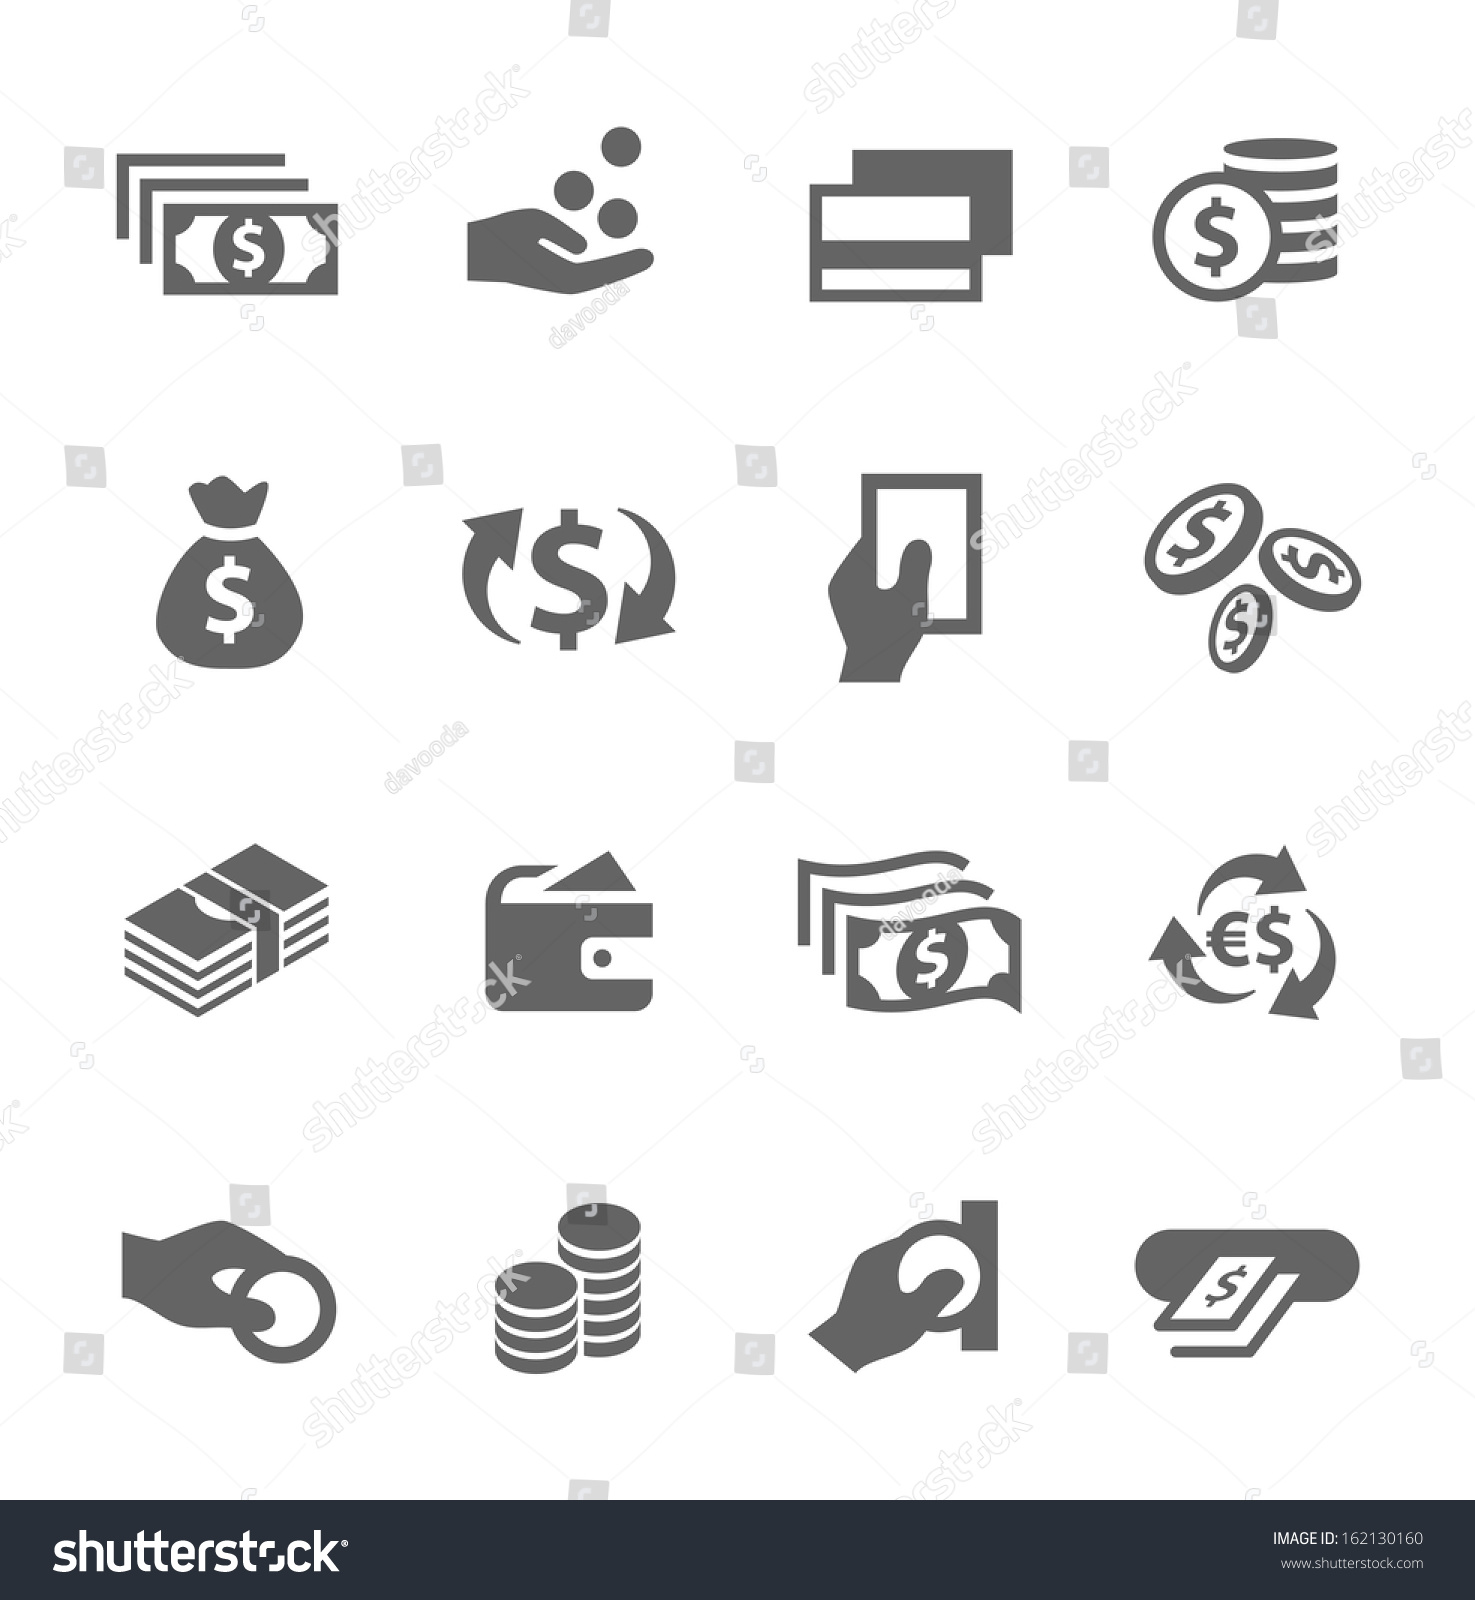 Simple icon set related to Money. A set of sixteen symbols.